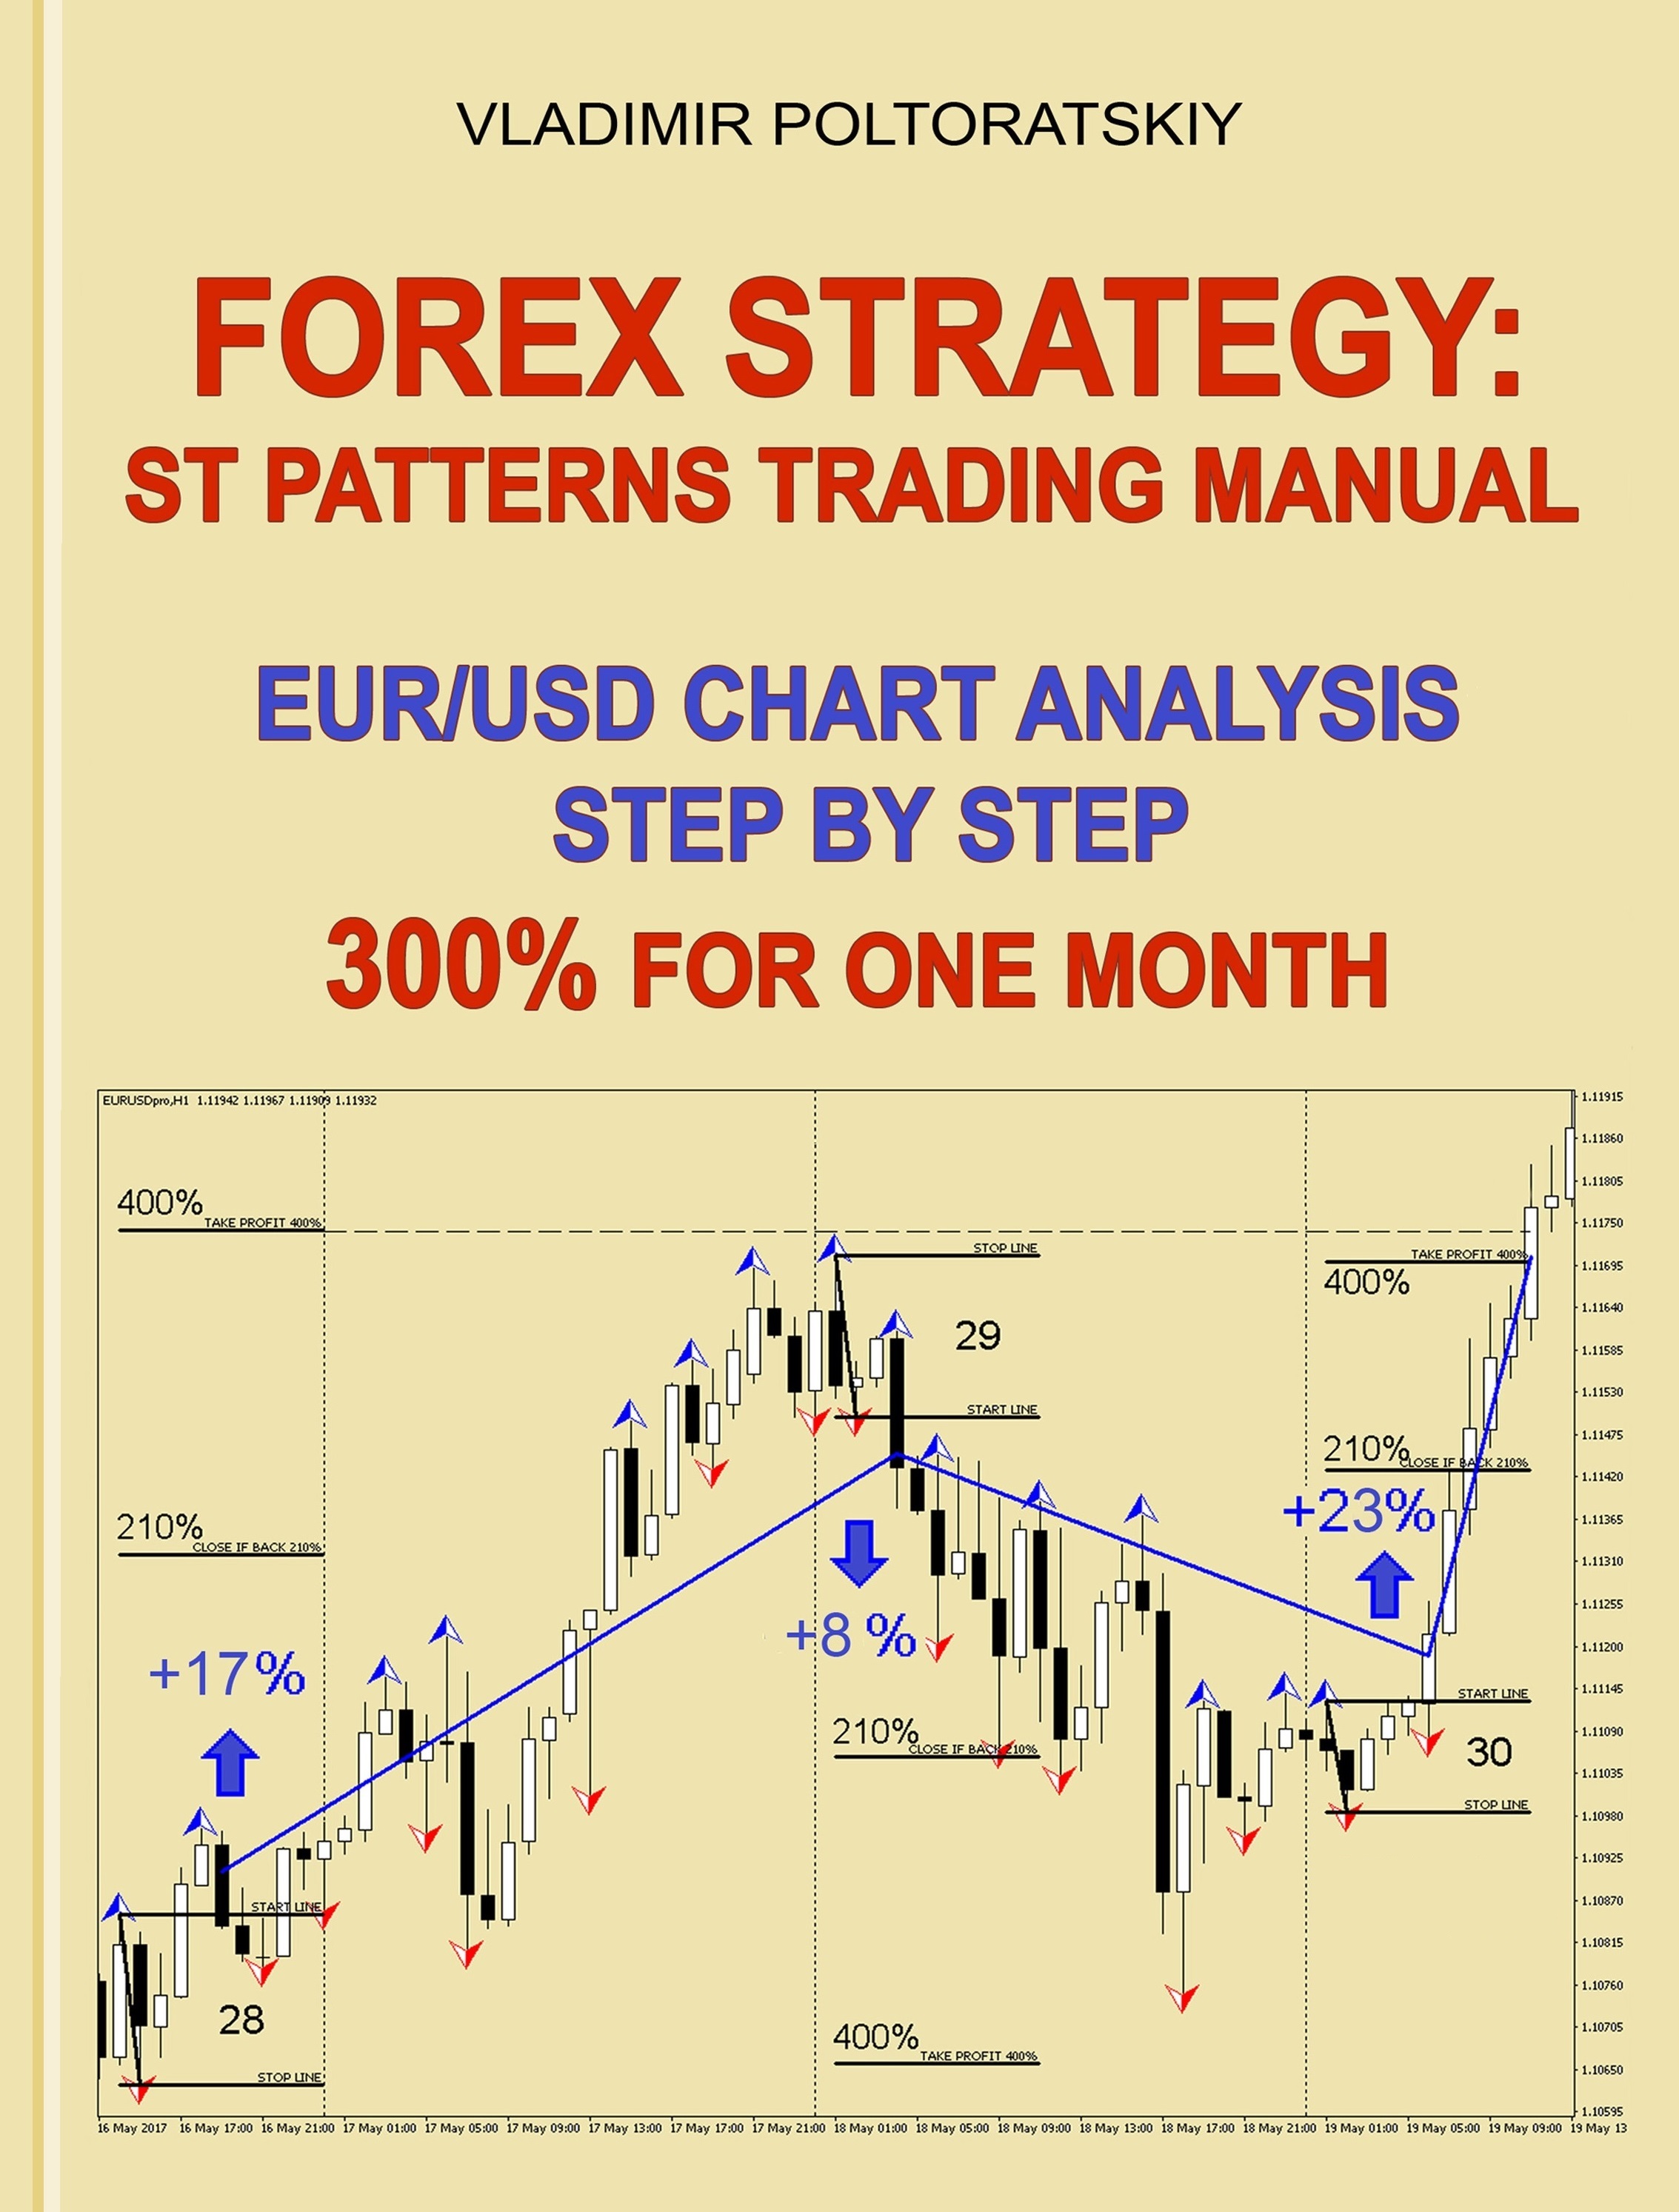 Forex Strategy St Patterns Trading Manual Chart Analysis Step By Step 300 For One Month An Ebook By Vladimir Poltoratskiy - 